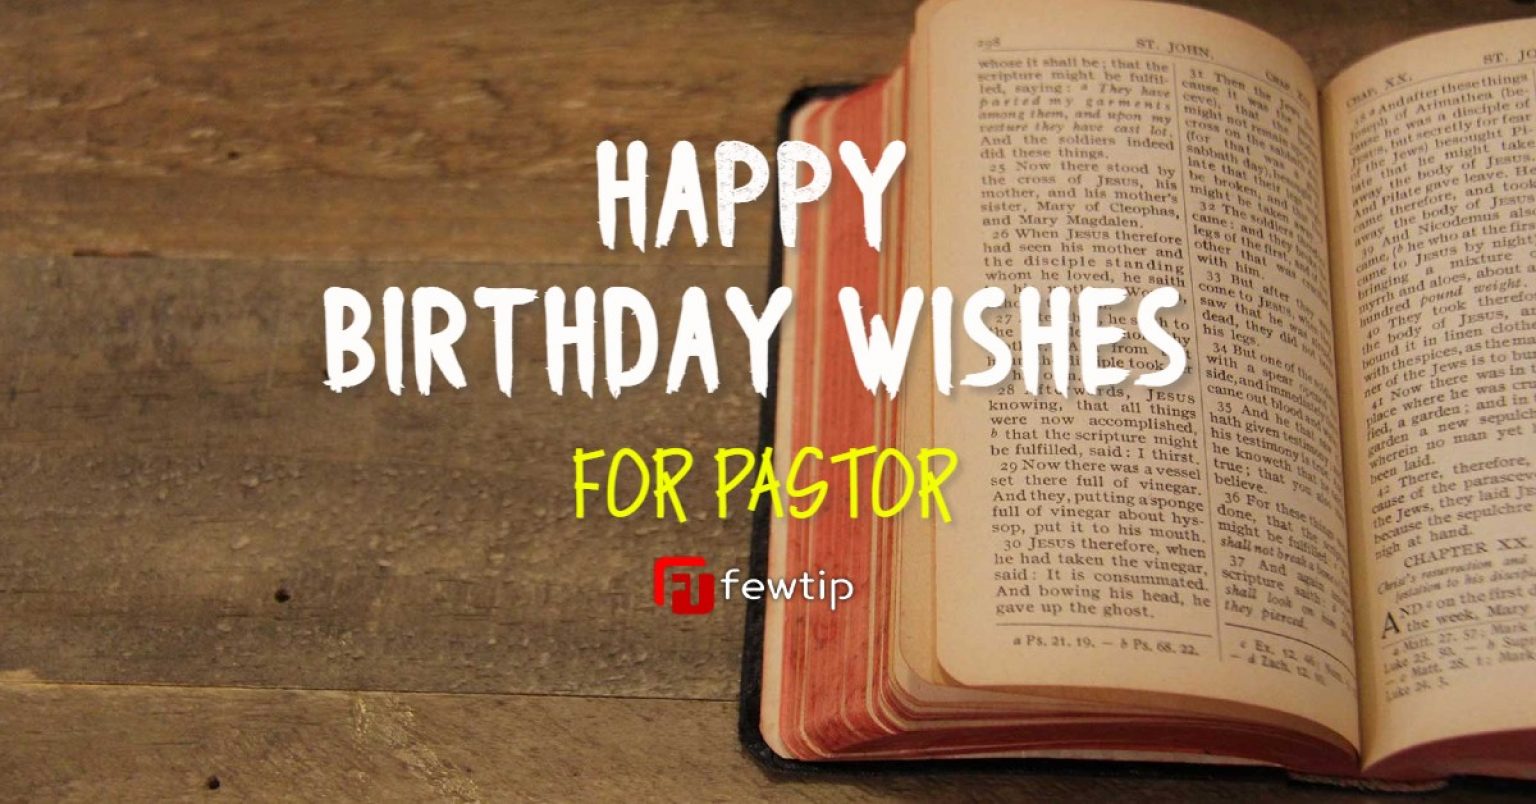 Lovely Happy Birthday Wishes For Pastor Fewtip